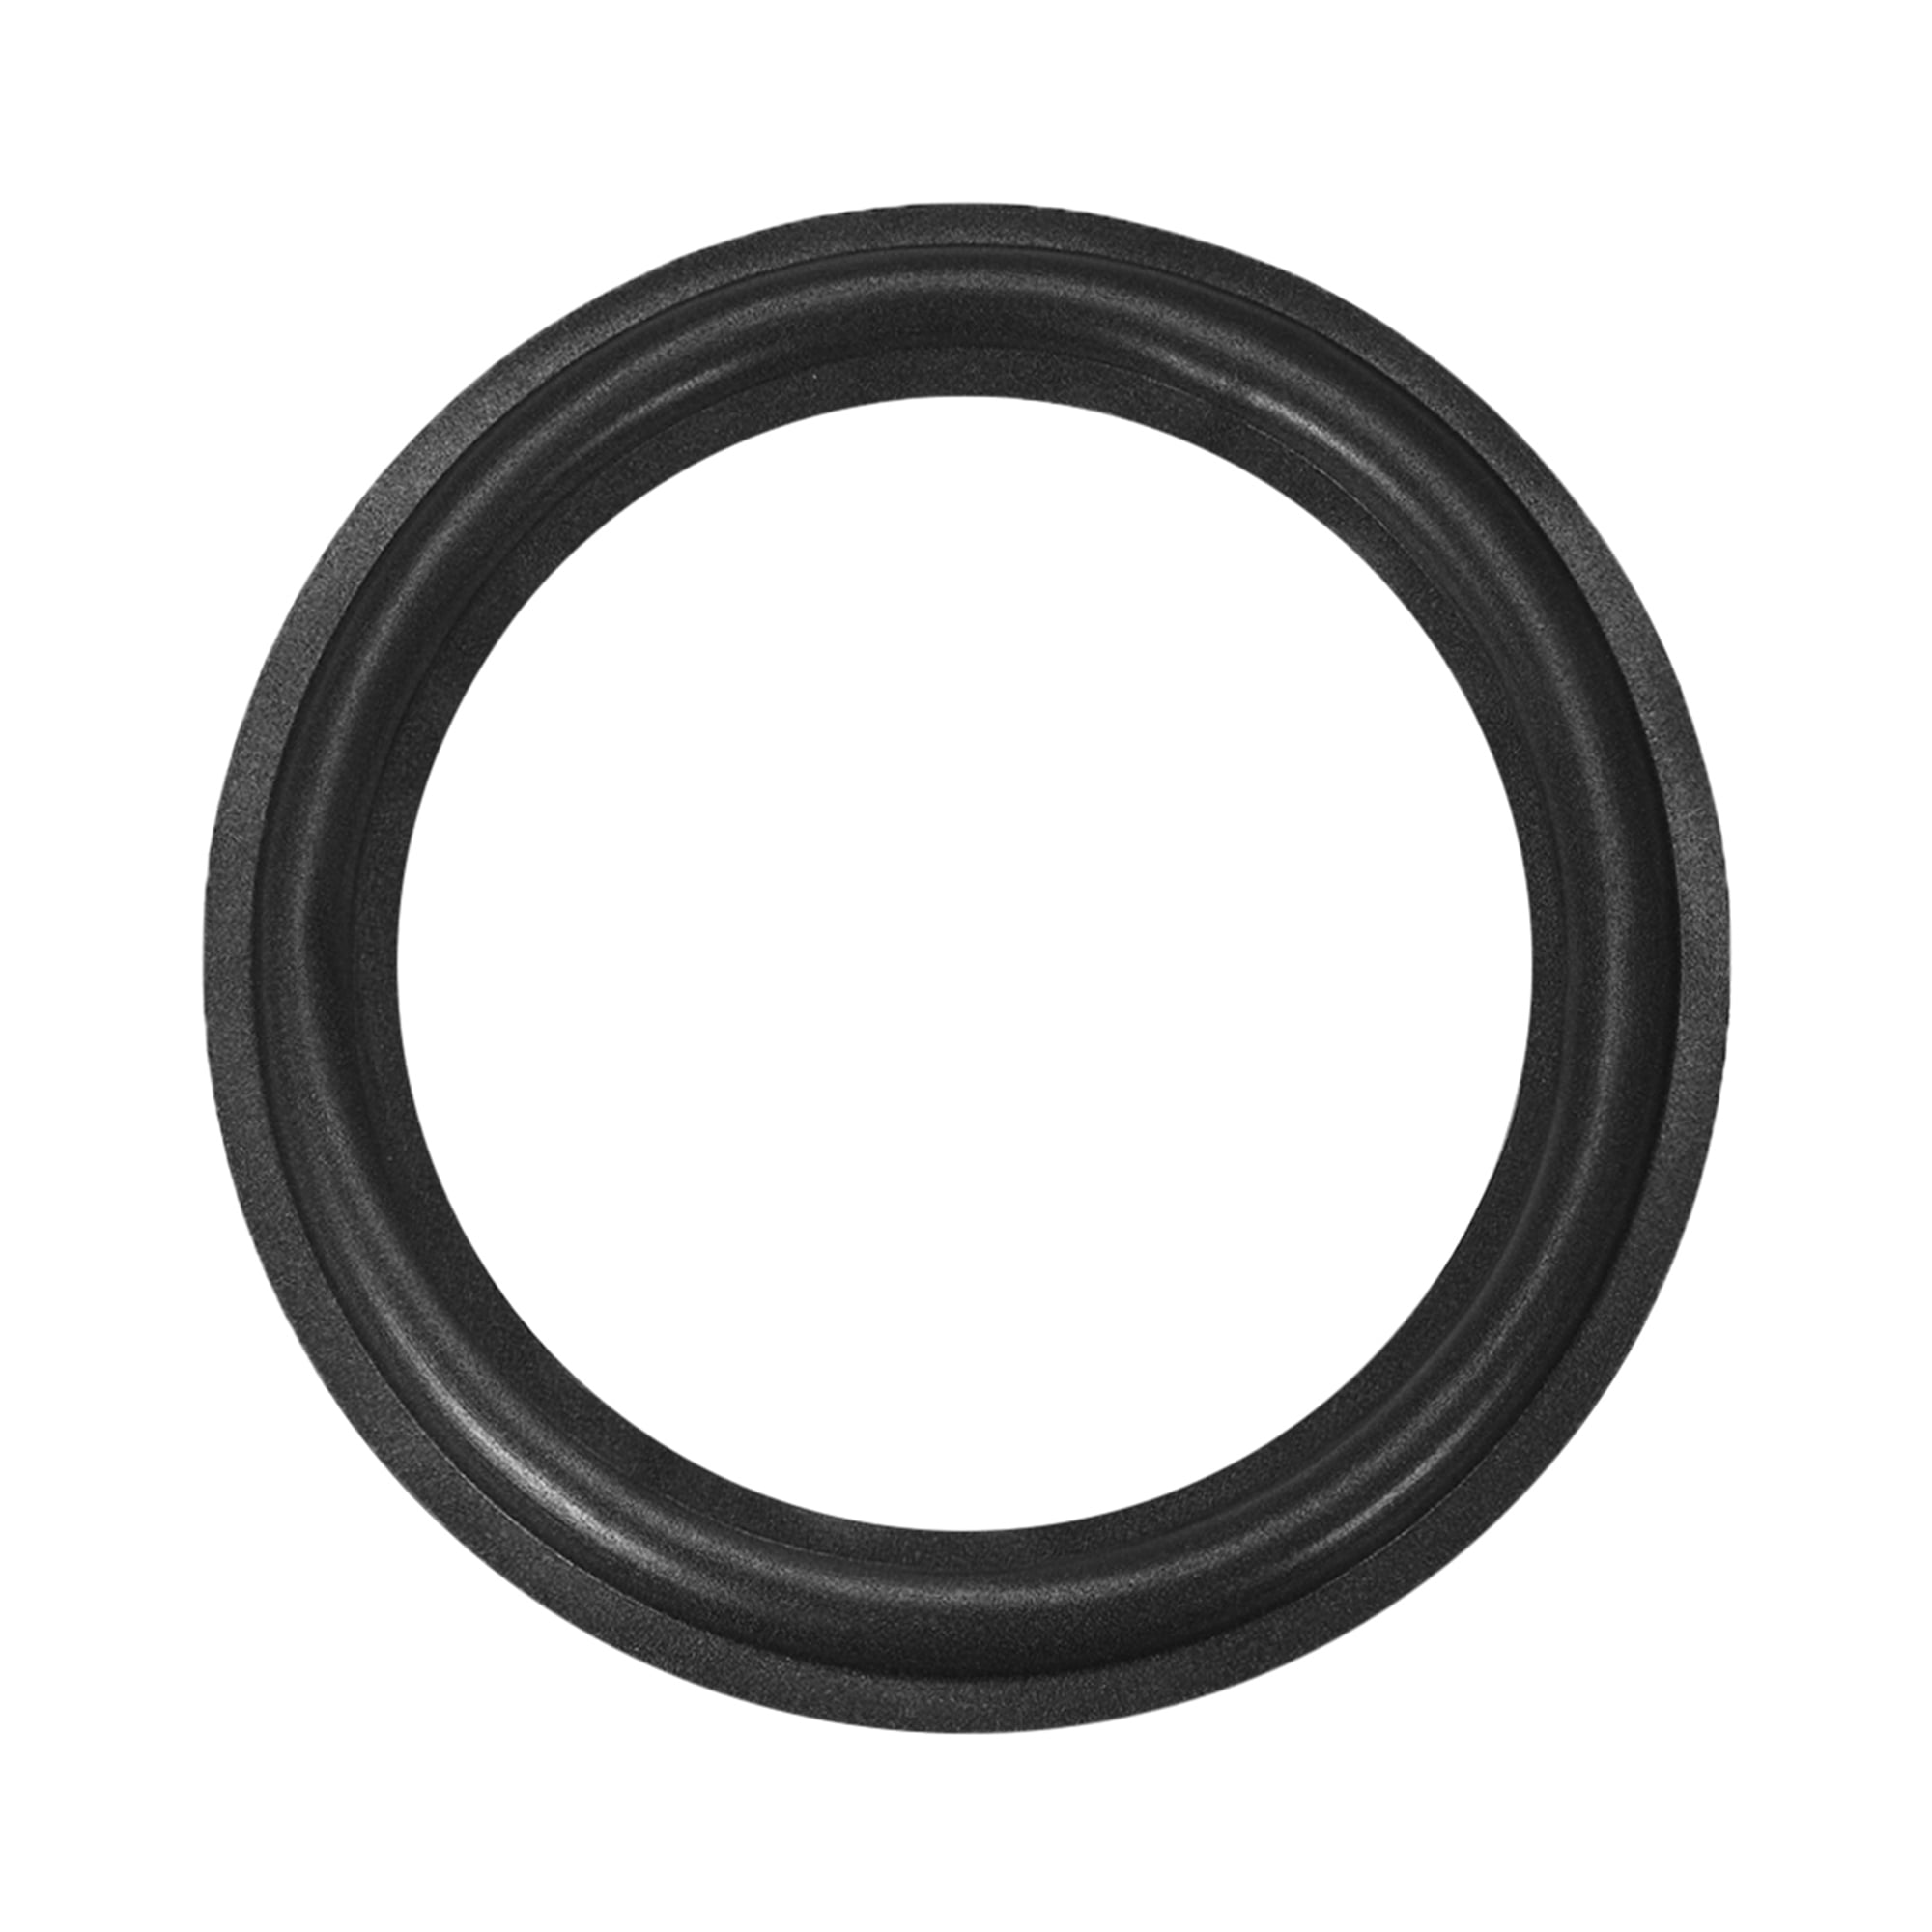 10 Inch Speaker Foam Edge Folding Ring Horn Replacement Parts for ...